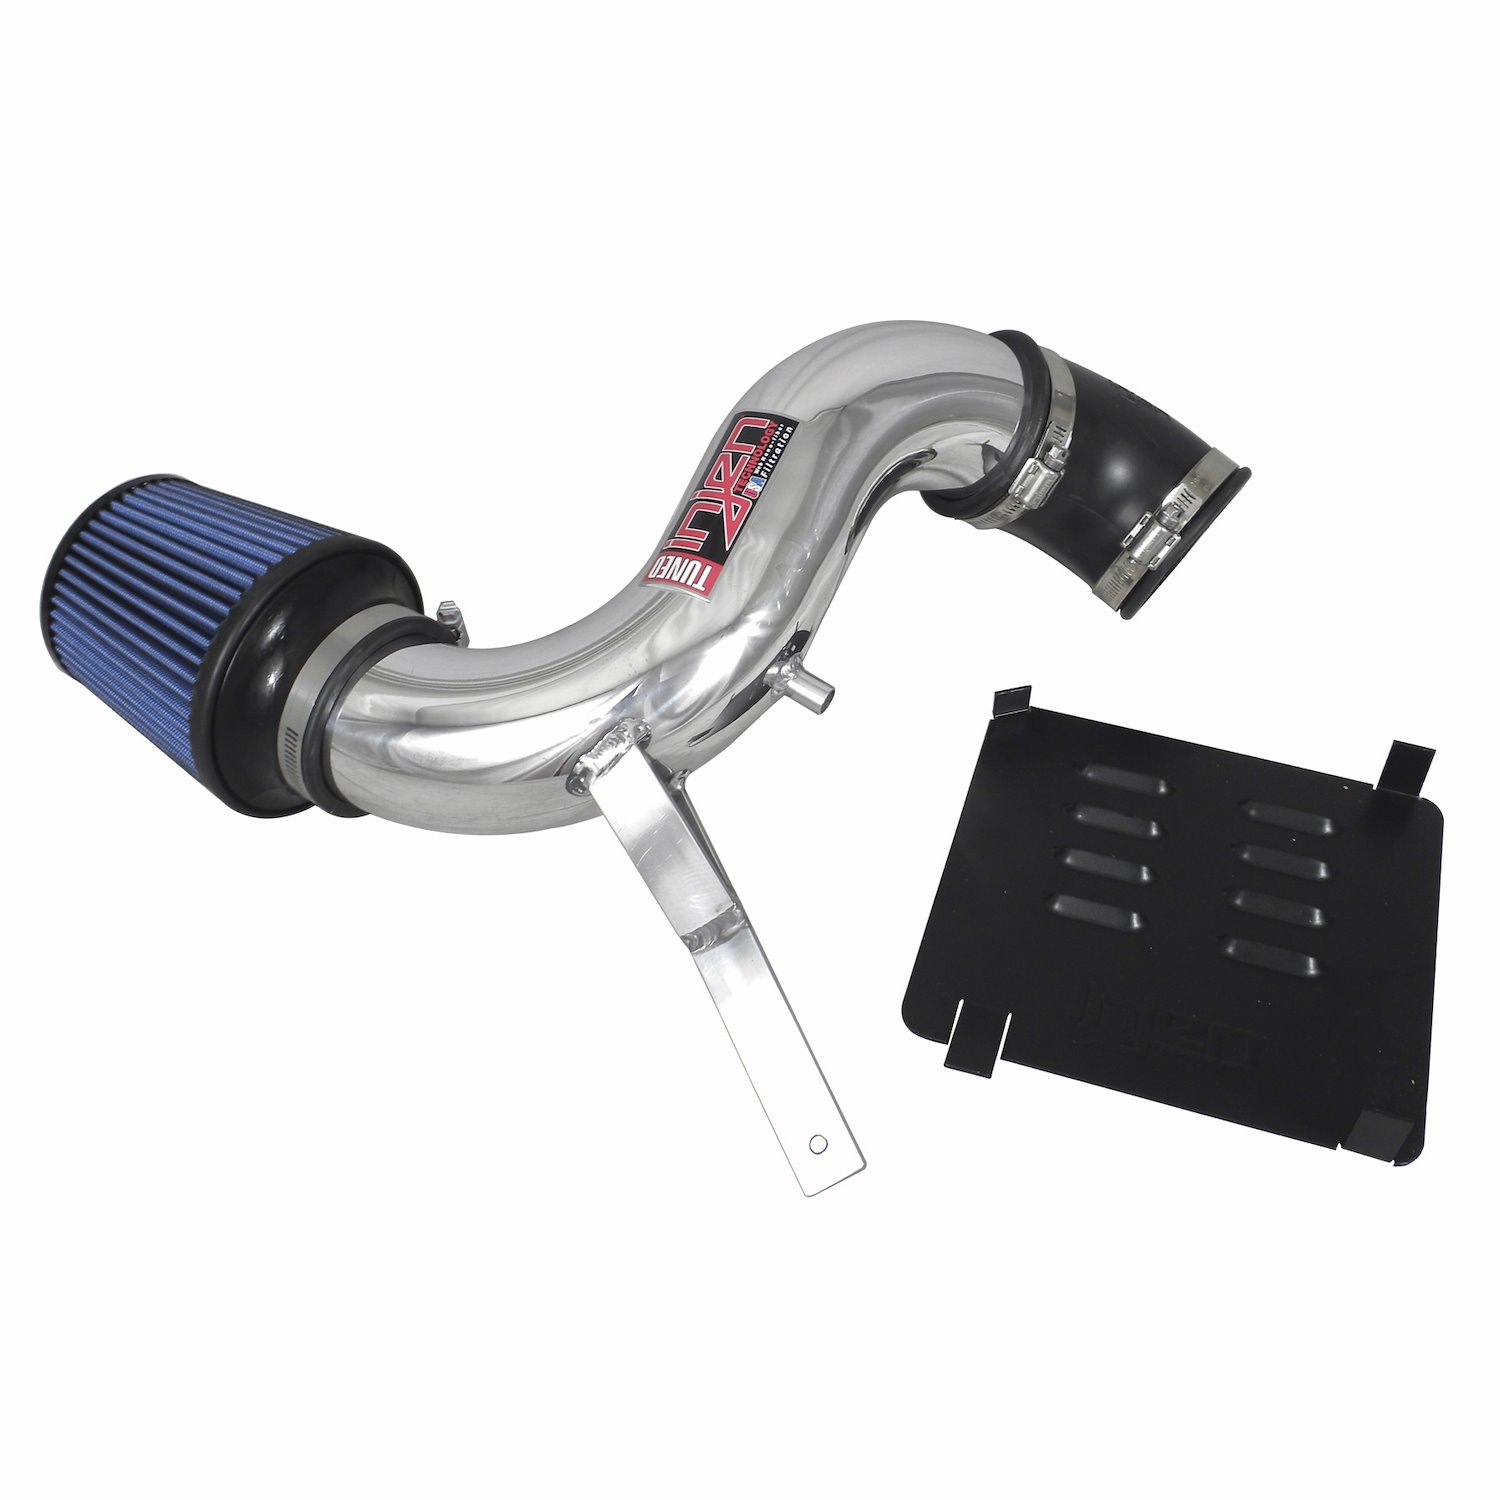 Polished IS Short Ram Cold Air Intake System,